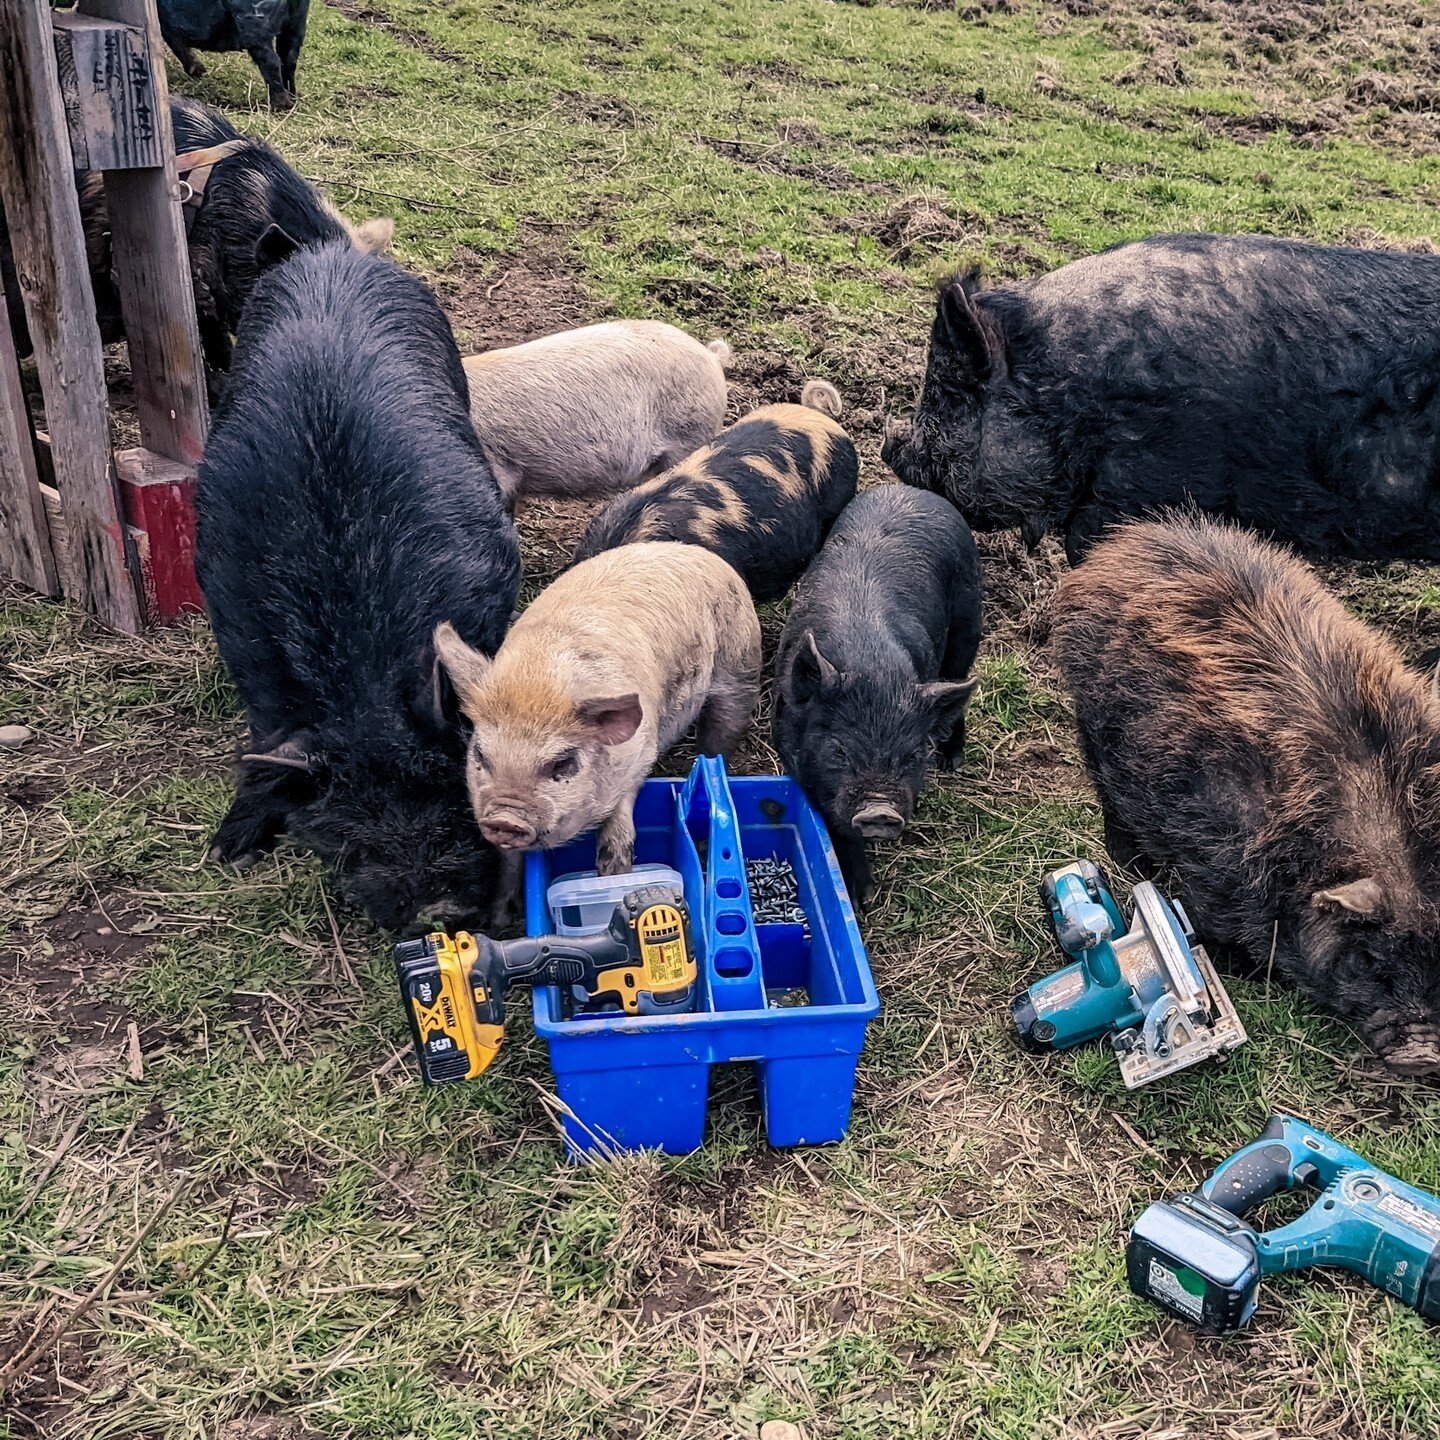 We are decidedly over capacity on pigs so Mack and Sarah built a couple new shelters with donated pallets and extra roofing from our barn. Obviously the piggies were very helpful with that project.⁠
⁠
⁠
#farmsanctuary #animalsanctuary #rescue #friend